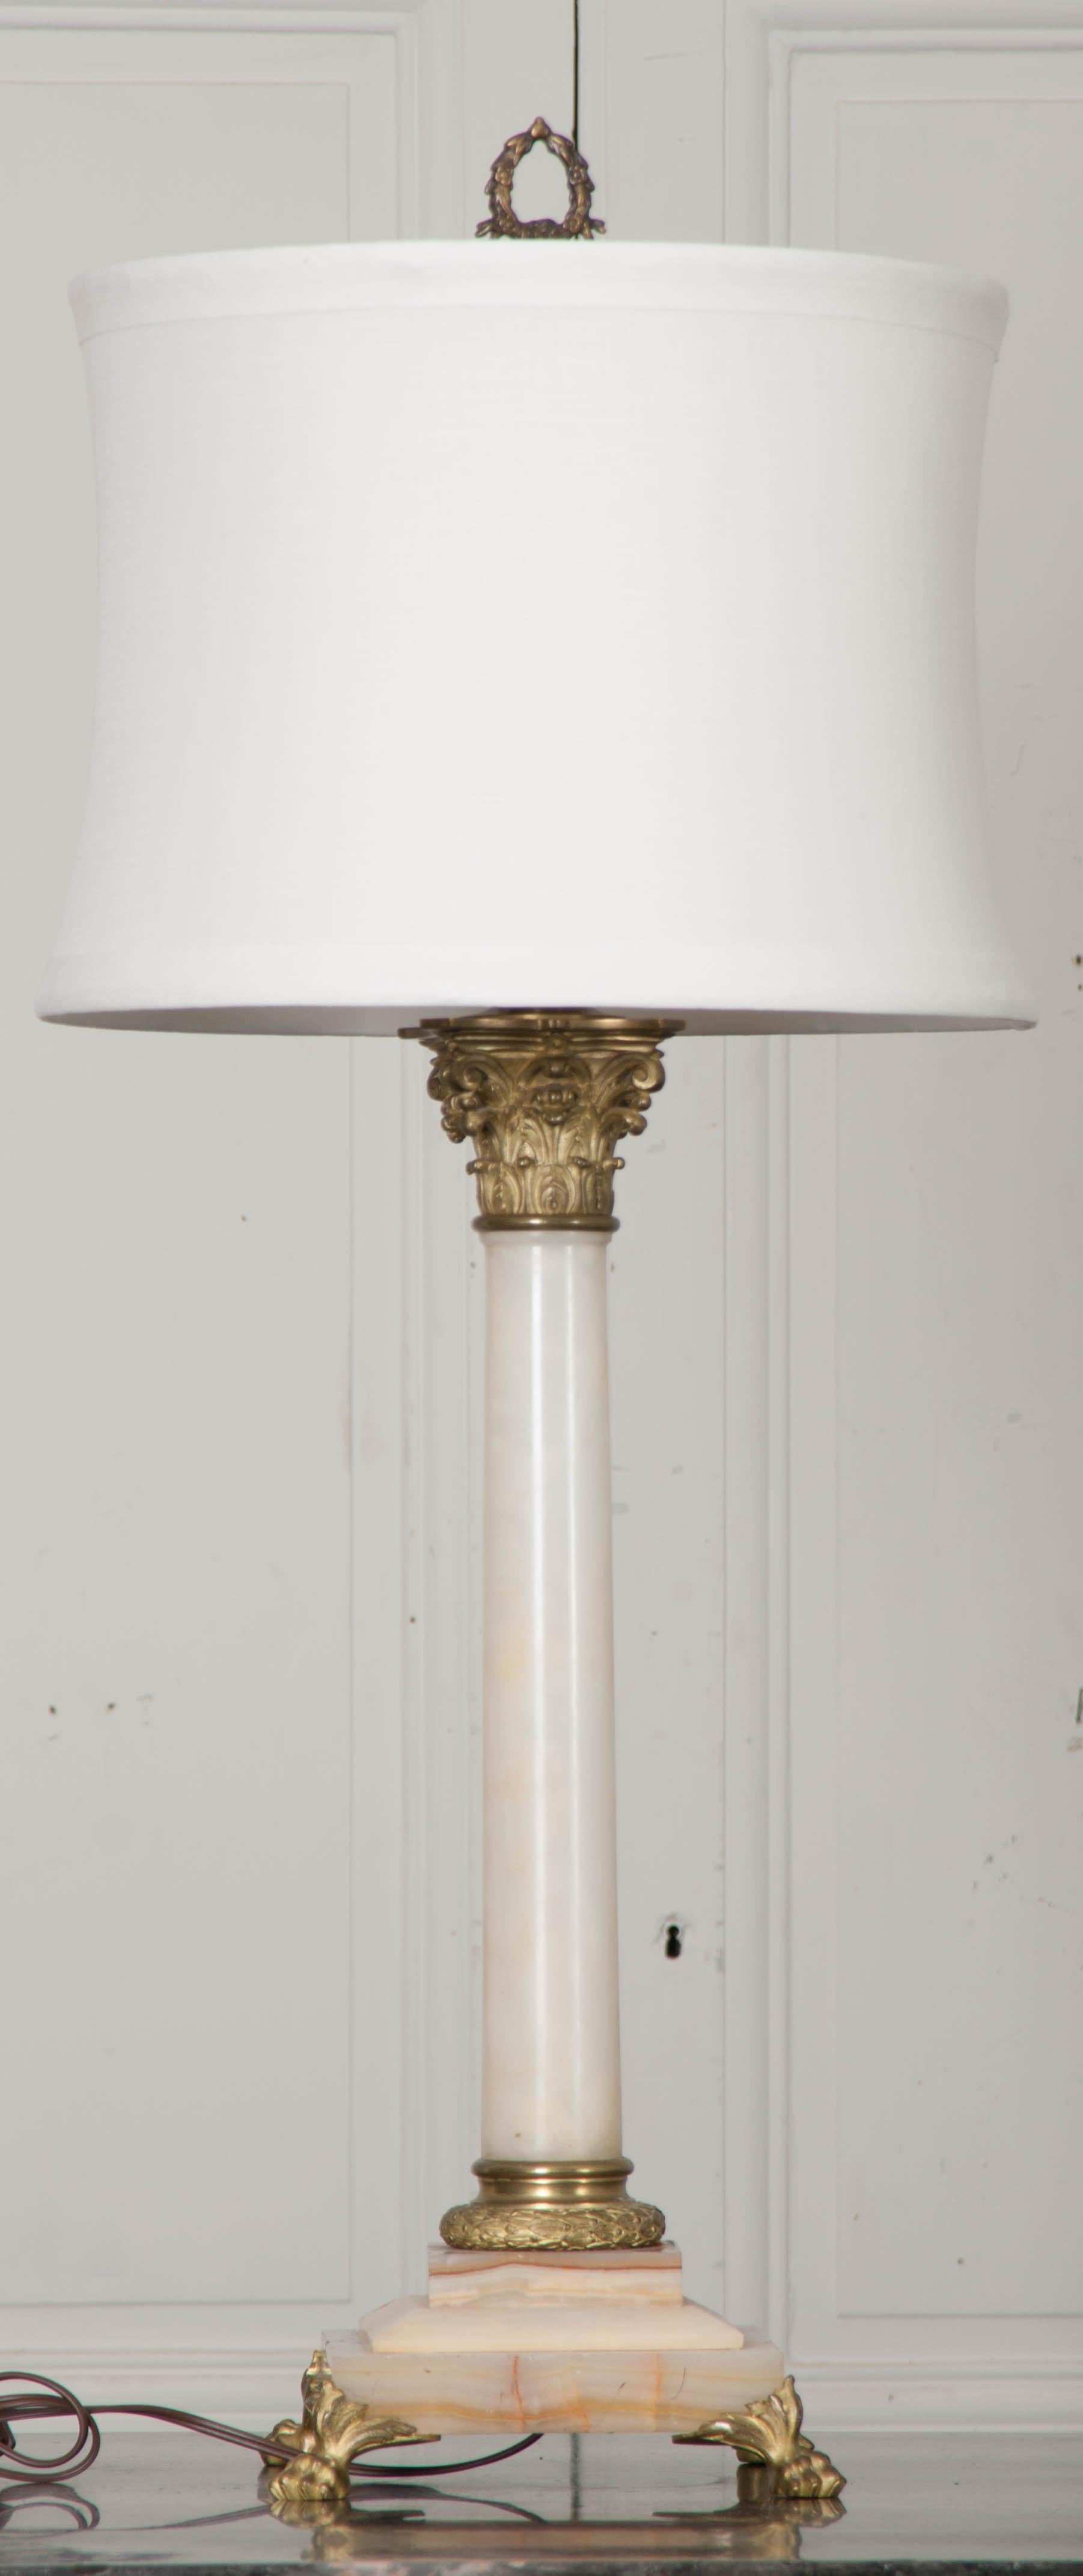 A stunning solid marble, column-form oil lamp base that has been electrified for use as an impressive table lamp. The Corinthian style column is ivory in color, with beautiful rust-colored veins, and rests on a stacked marble base. The gilt brass